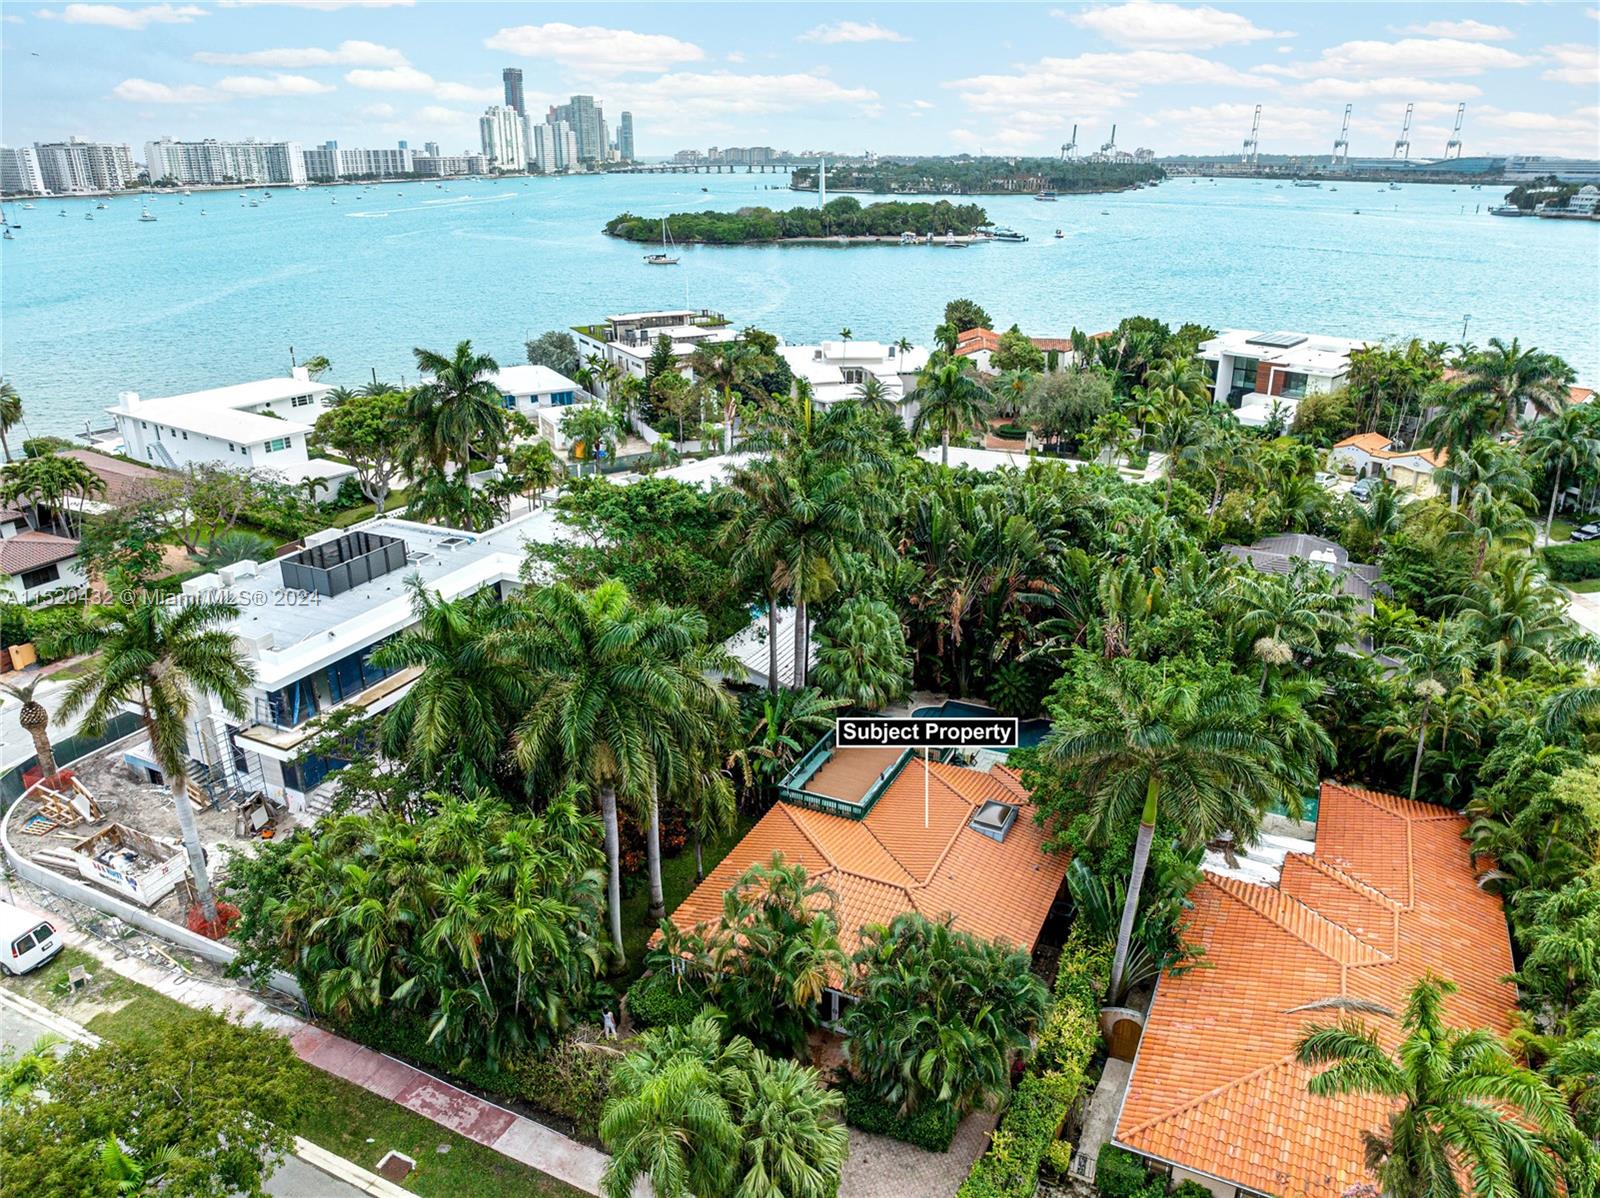 Immerse Yourself in Island Luxury! This impeccably maintained 3-bed, 2.5-bath residence sits on an oversized 10,032 sq ft lot south on Rivo Alto best of the Venetian Islands jewel. A prime location puts you within walking distance of Sunset Harbour's lively atmosphere, multiple gyms, yoga, restaurants, Fresh market grocery food, and children's park. This charming home seamlessly merges style and comfort, providing a move-in-ready sanctuary. This island haven invites you to experience the ease of sophisticated living, offering a unique blend of convenience and elegance. Don't miss the opportunity to claim this extraordinary property as your own—schedule your showing today! A great opportunity to redevelop as well and build a beautiful
mansion.